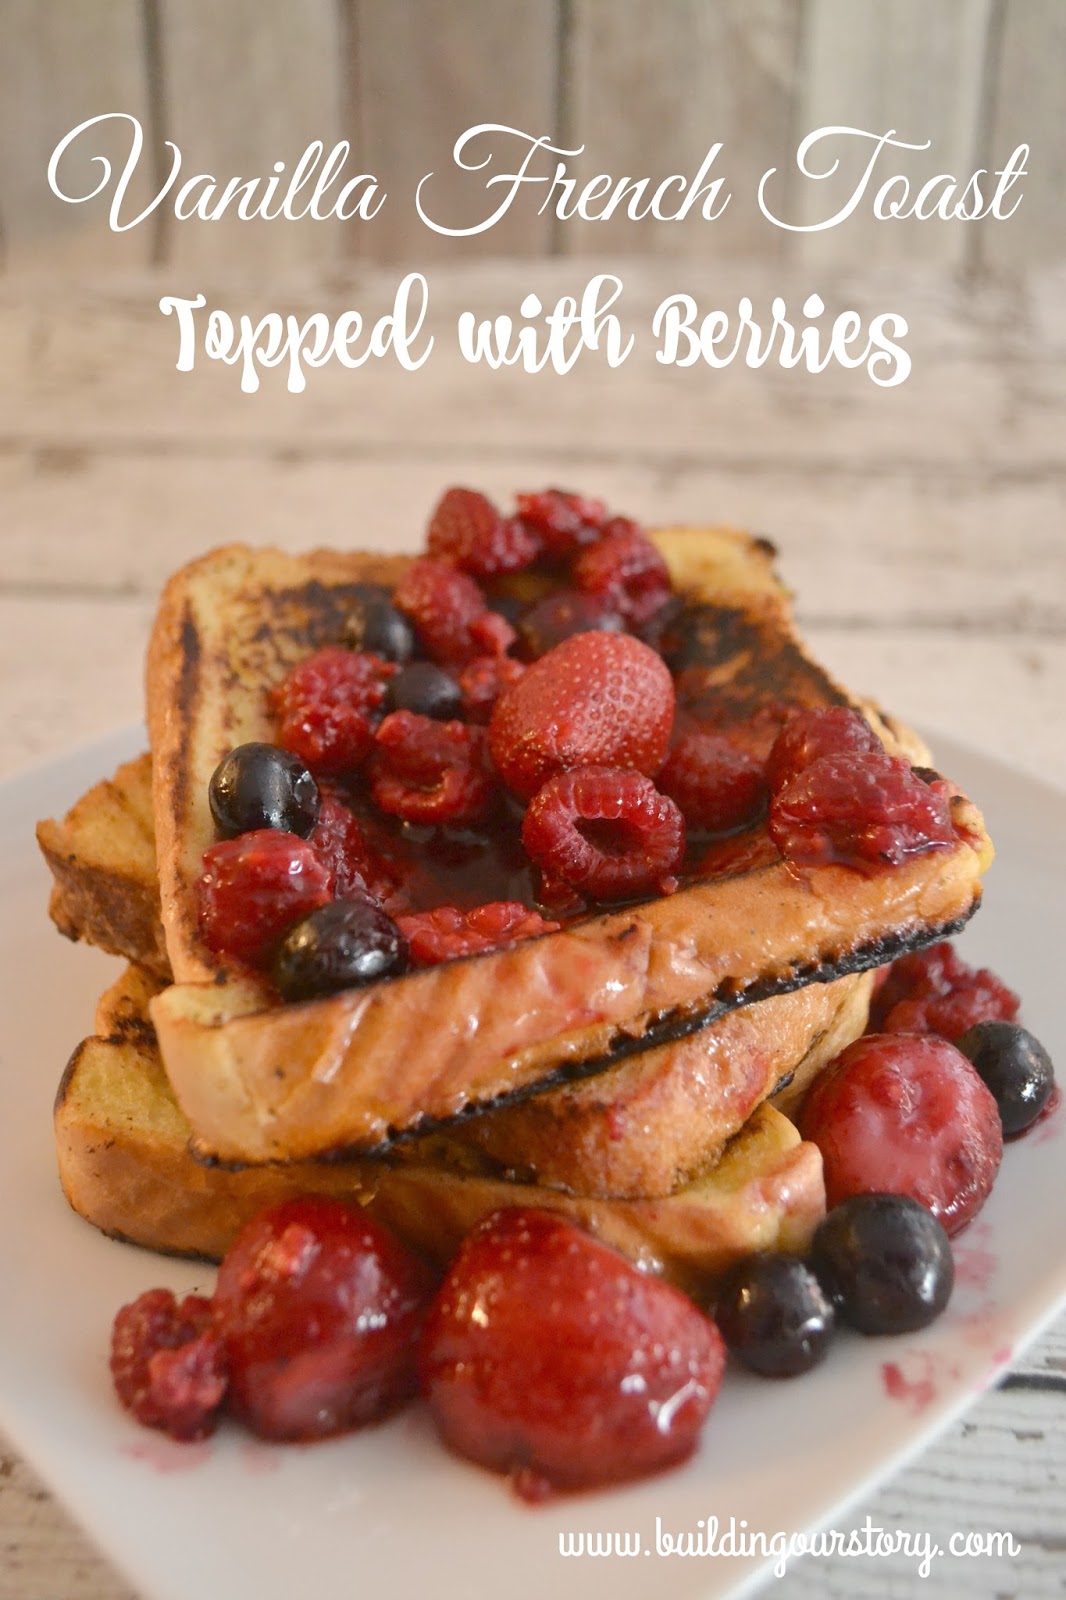 Vanilla French Toast Topped with Berries | Building Our Story